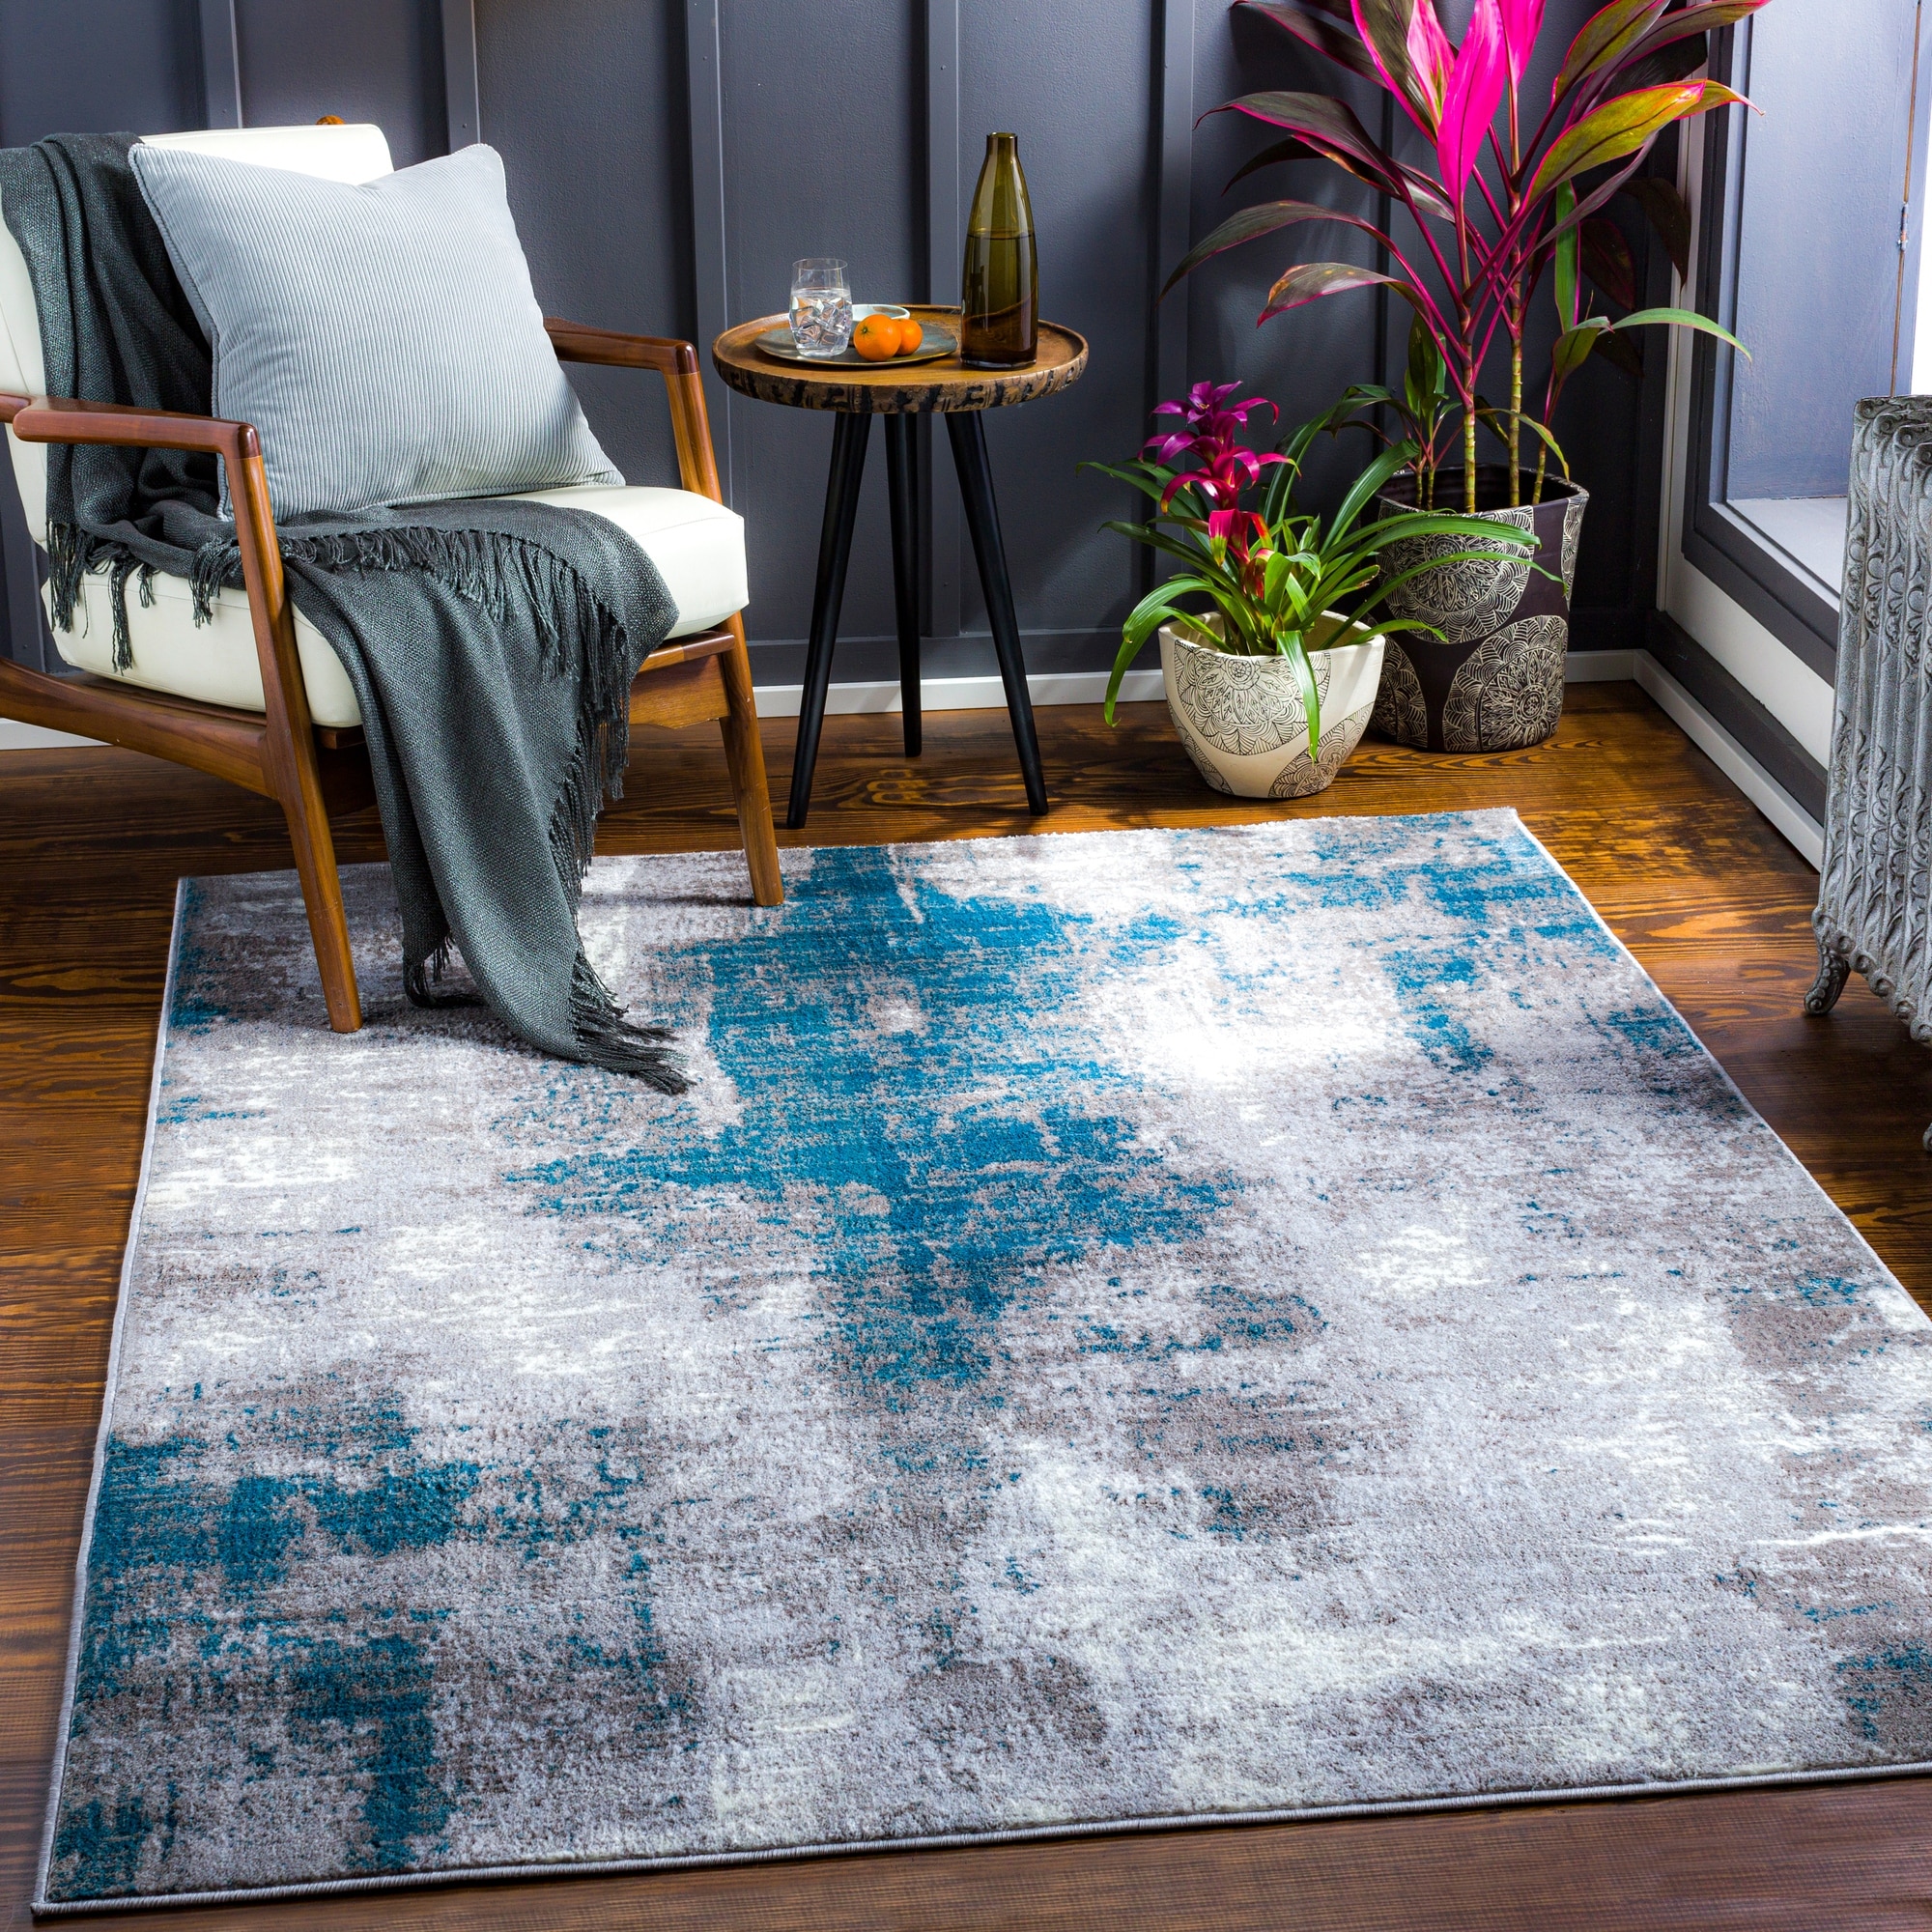 https://ak1.ostkcdn.com/images/products/is/images/direct/05e19d908d005dc109df41ca3adbb1e45f7c40ee/Cooke-Industrial-Abstract-Polyester-Area-Rug.jpg